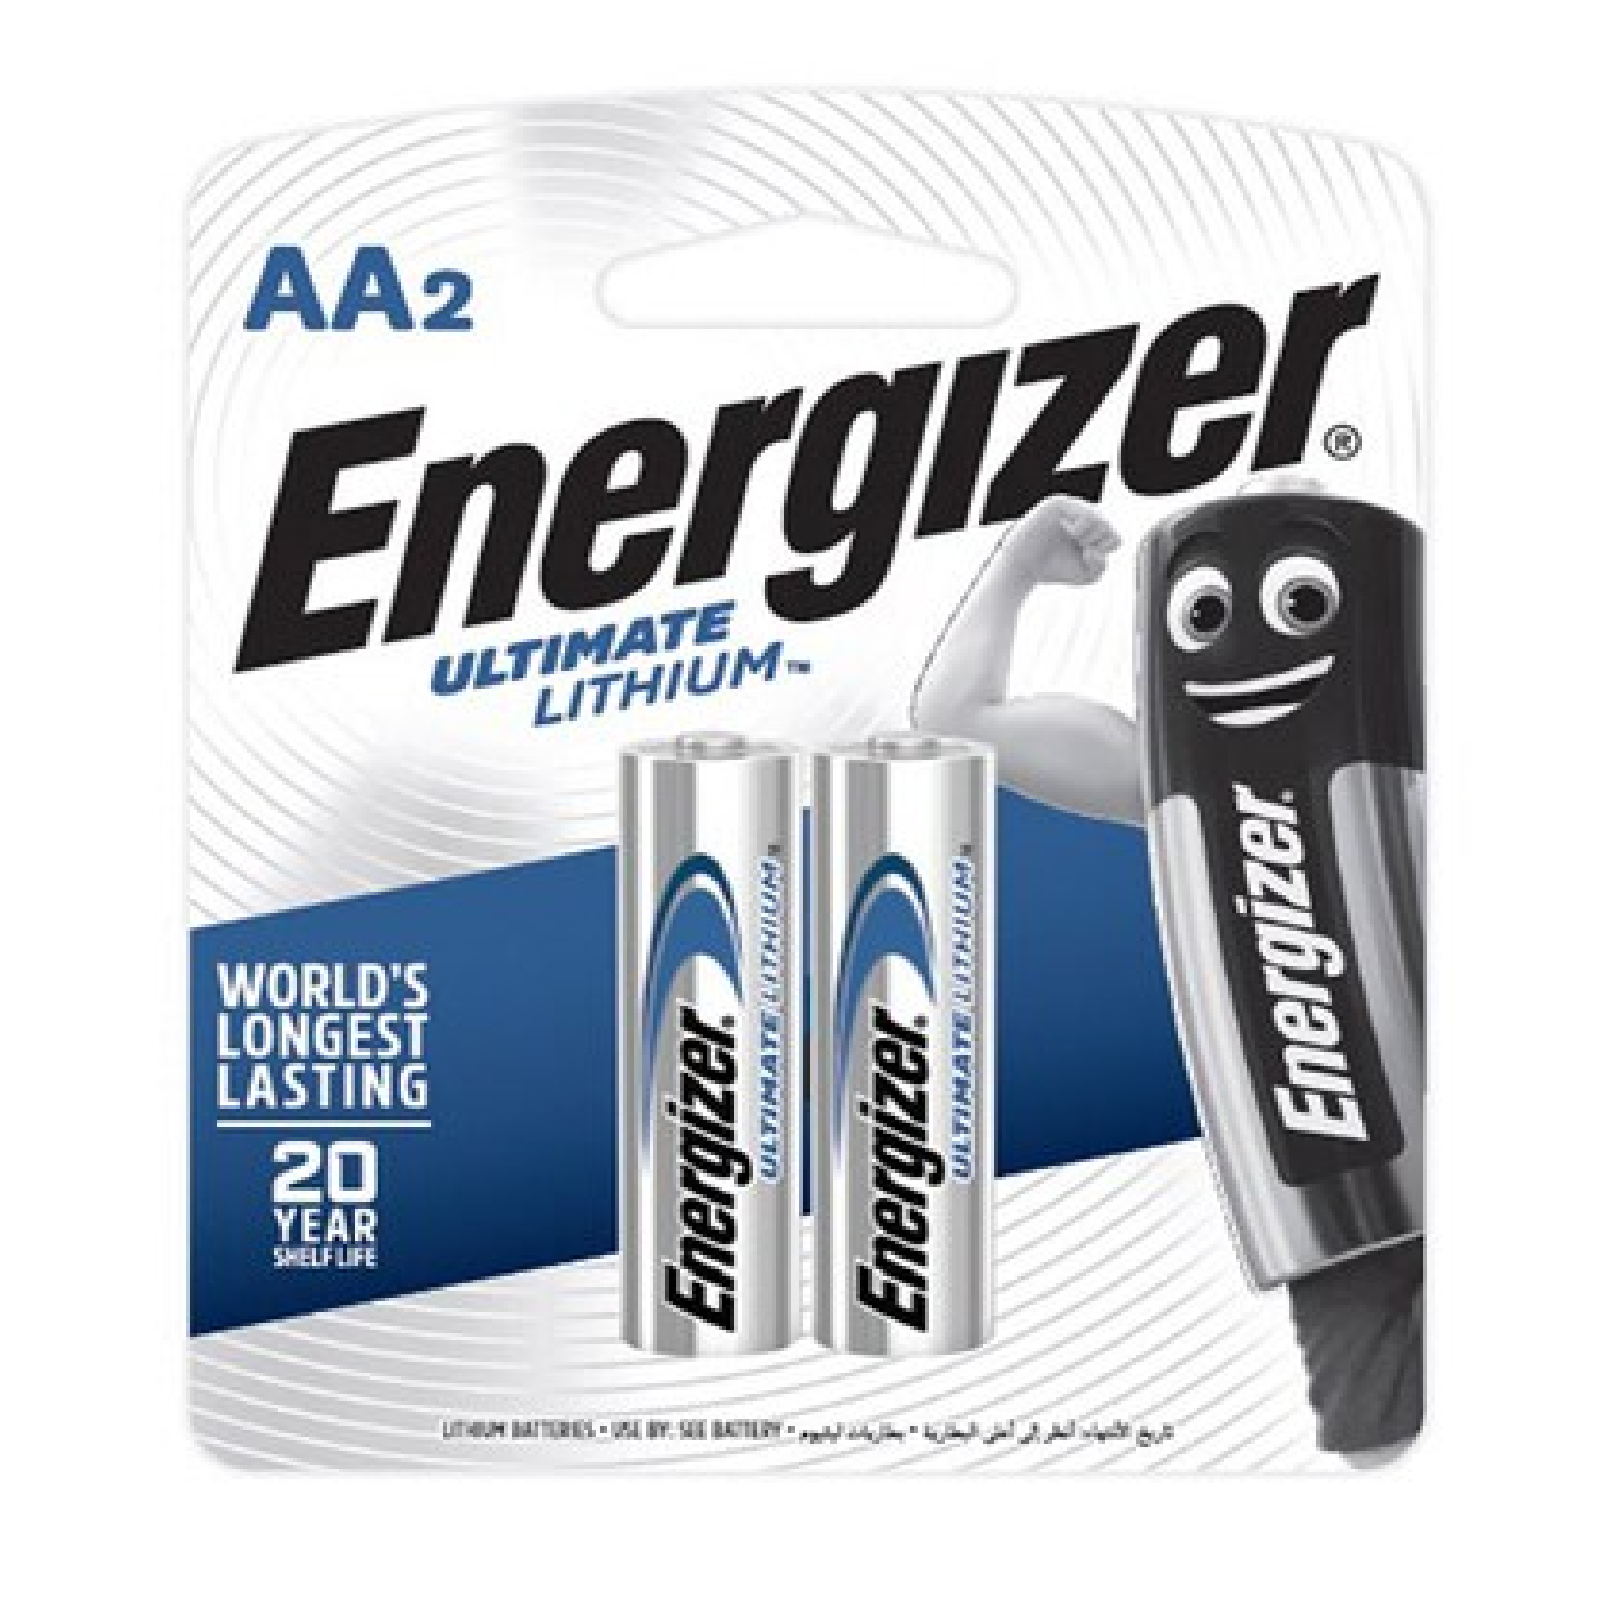 Energizer ULTIMATE LITHIUM AA Battery 2PC/Pack